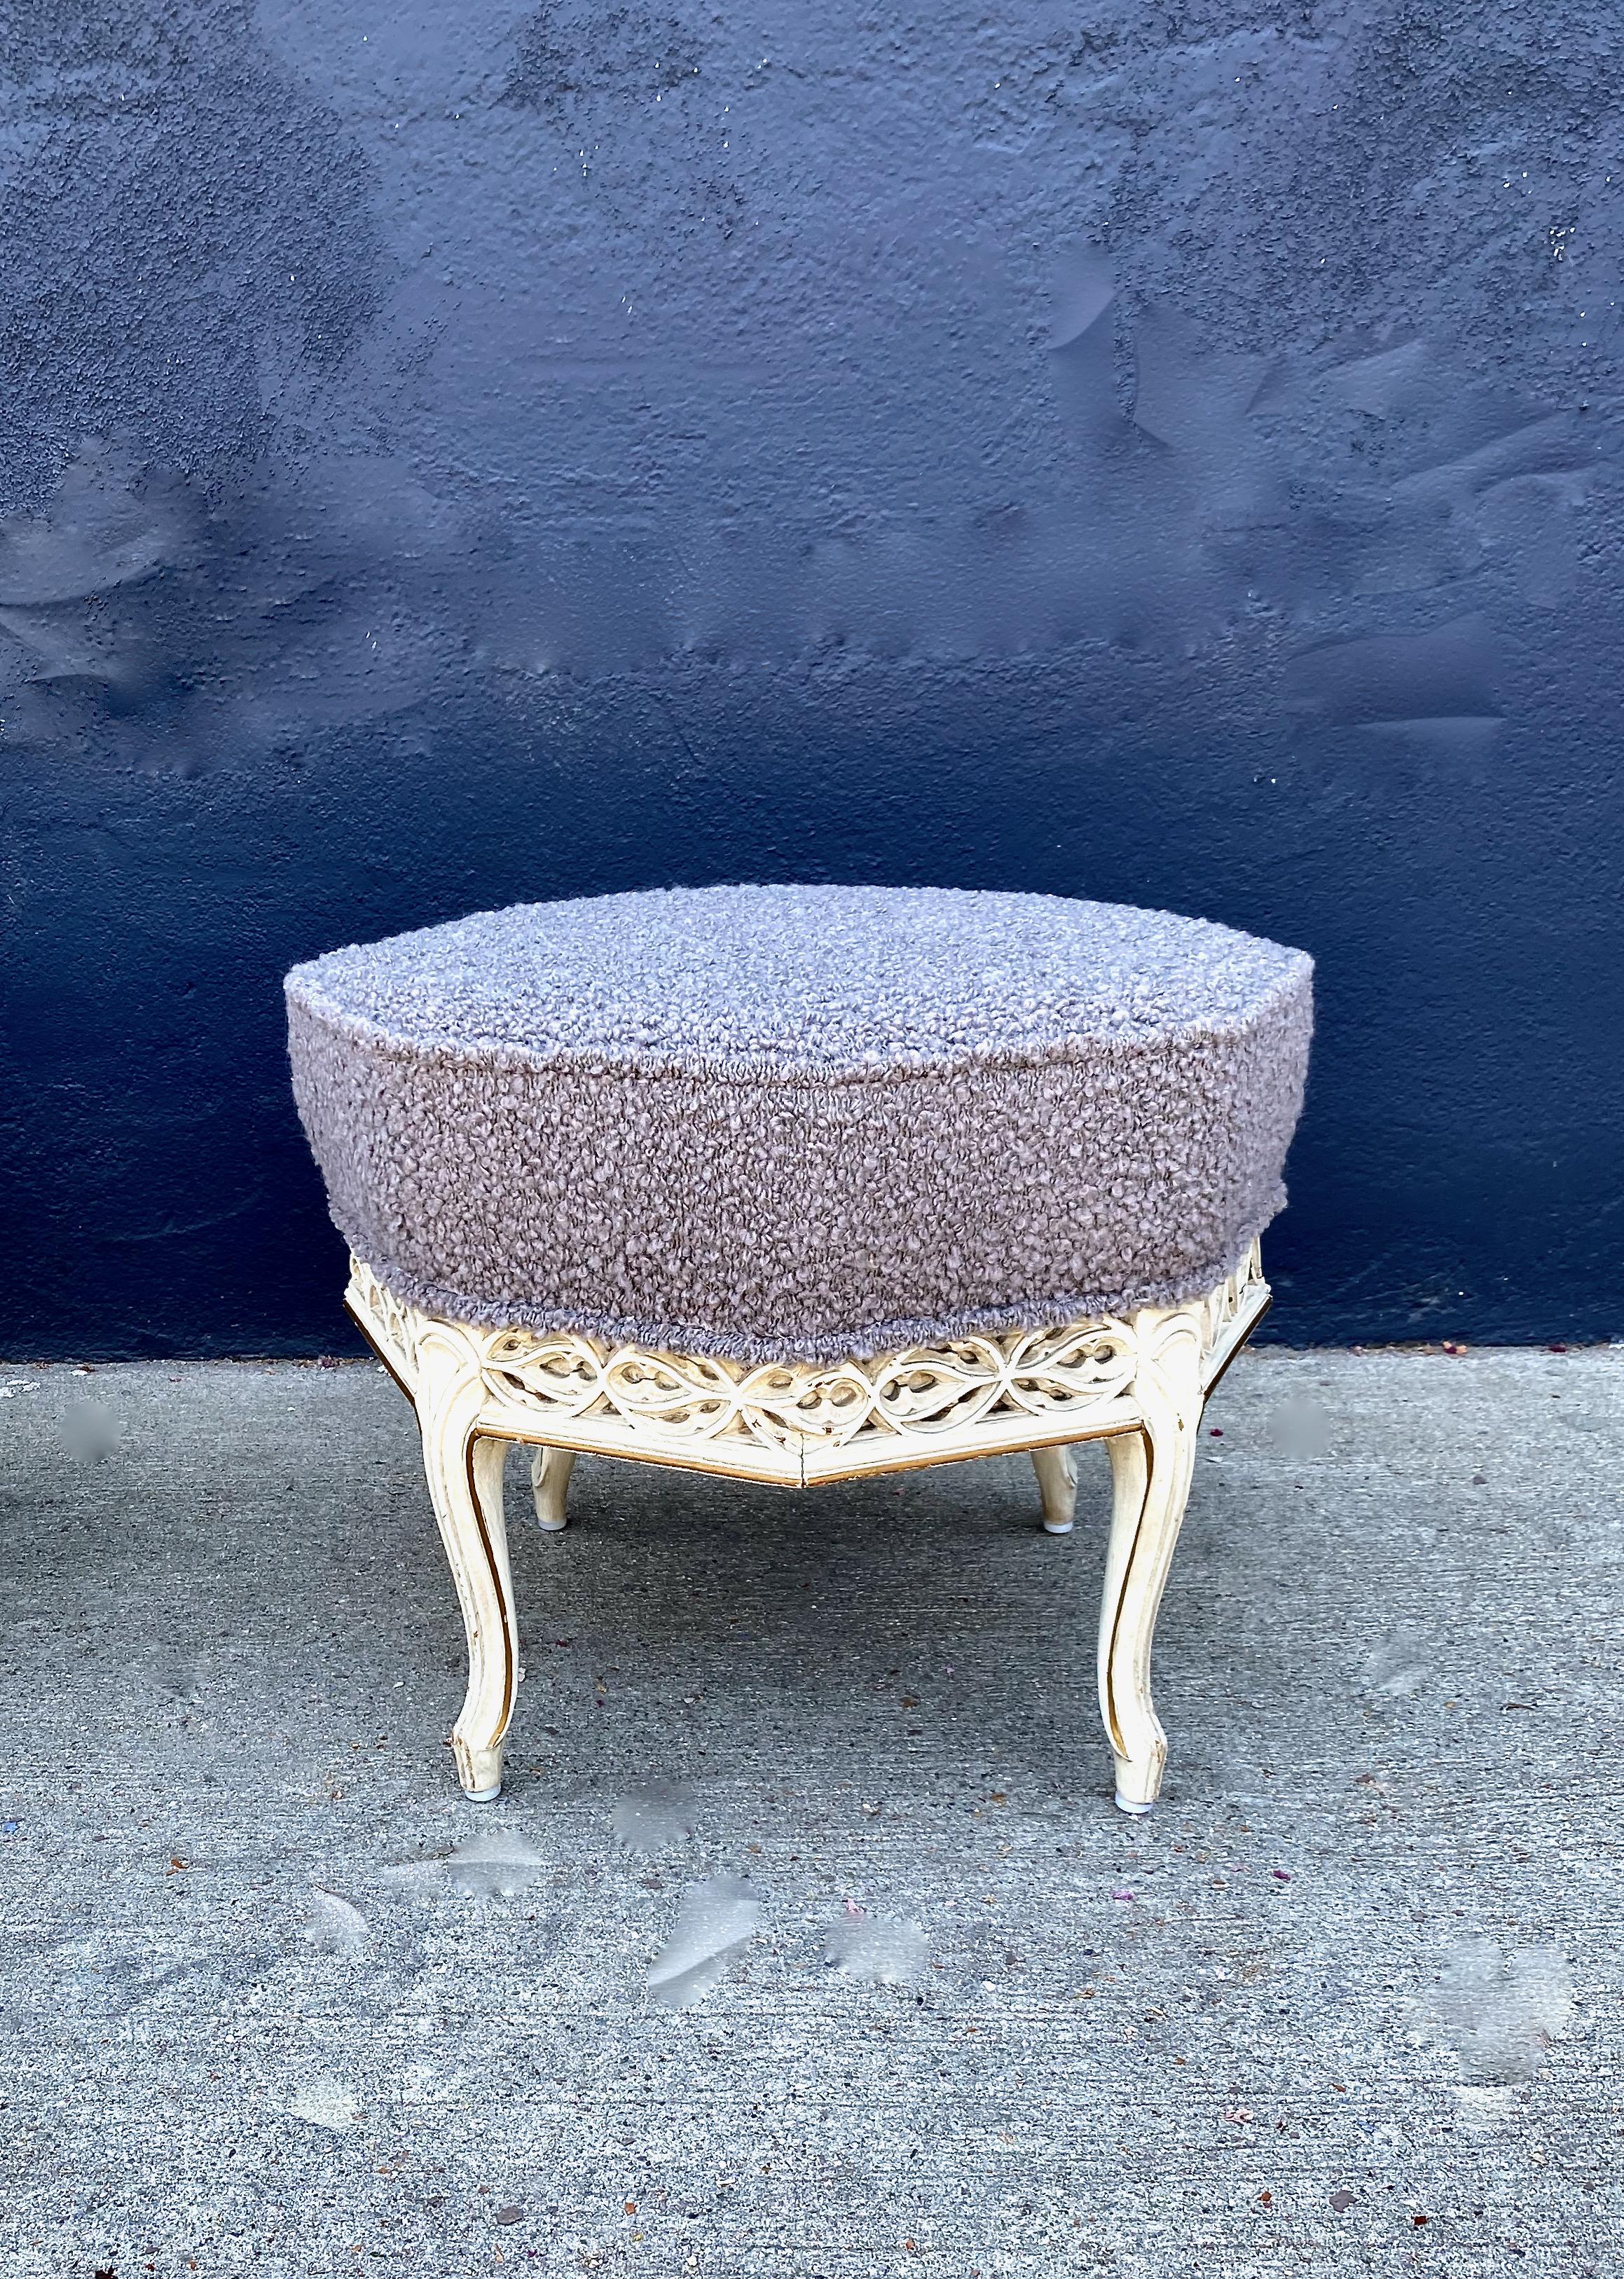 This is a unique pair of Gothic-Style stools that date to the early 20th century. The frames of the stools are well carved in an octagonal Gothic tracery design. The seats are newly upholstered in a rich gray Pierre Frey wool boucle. These stools